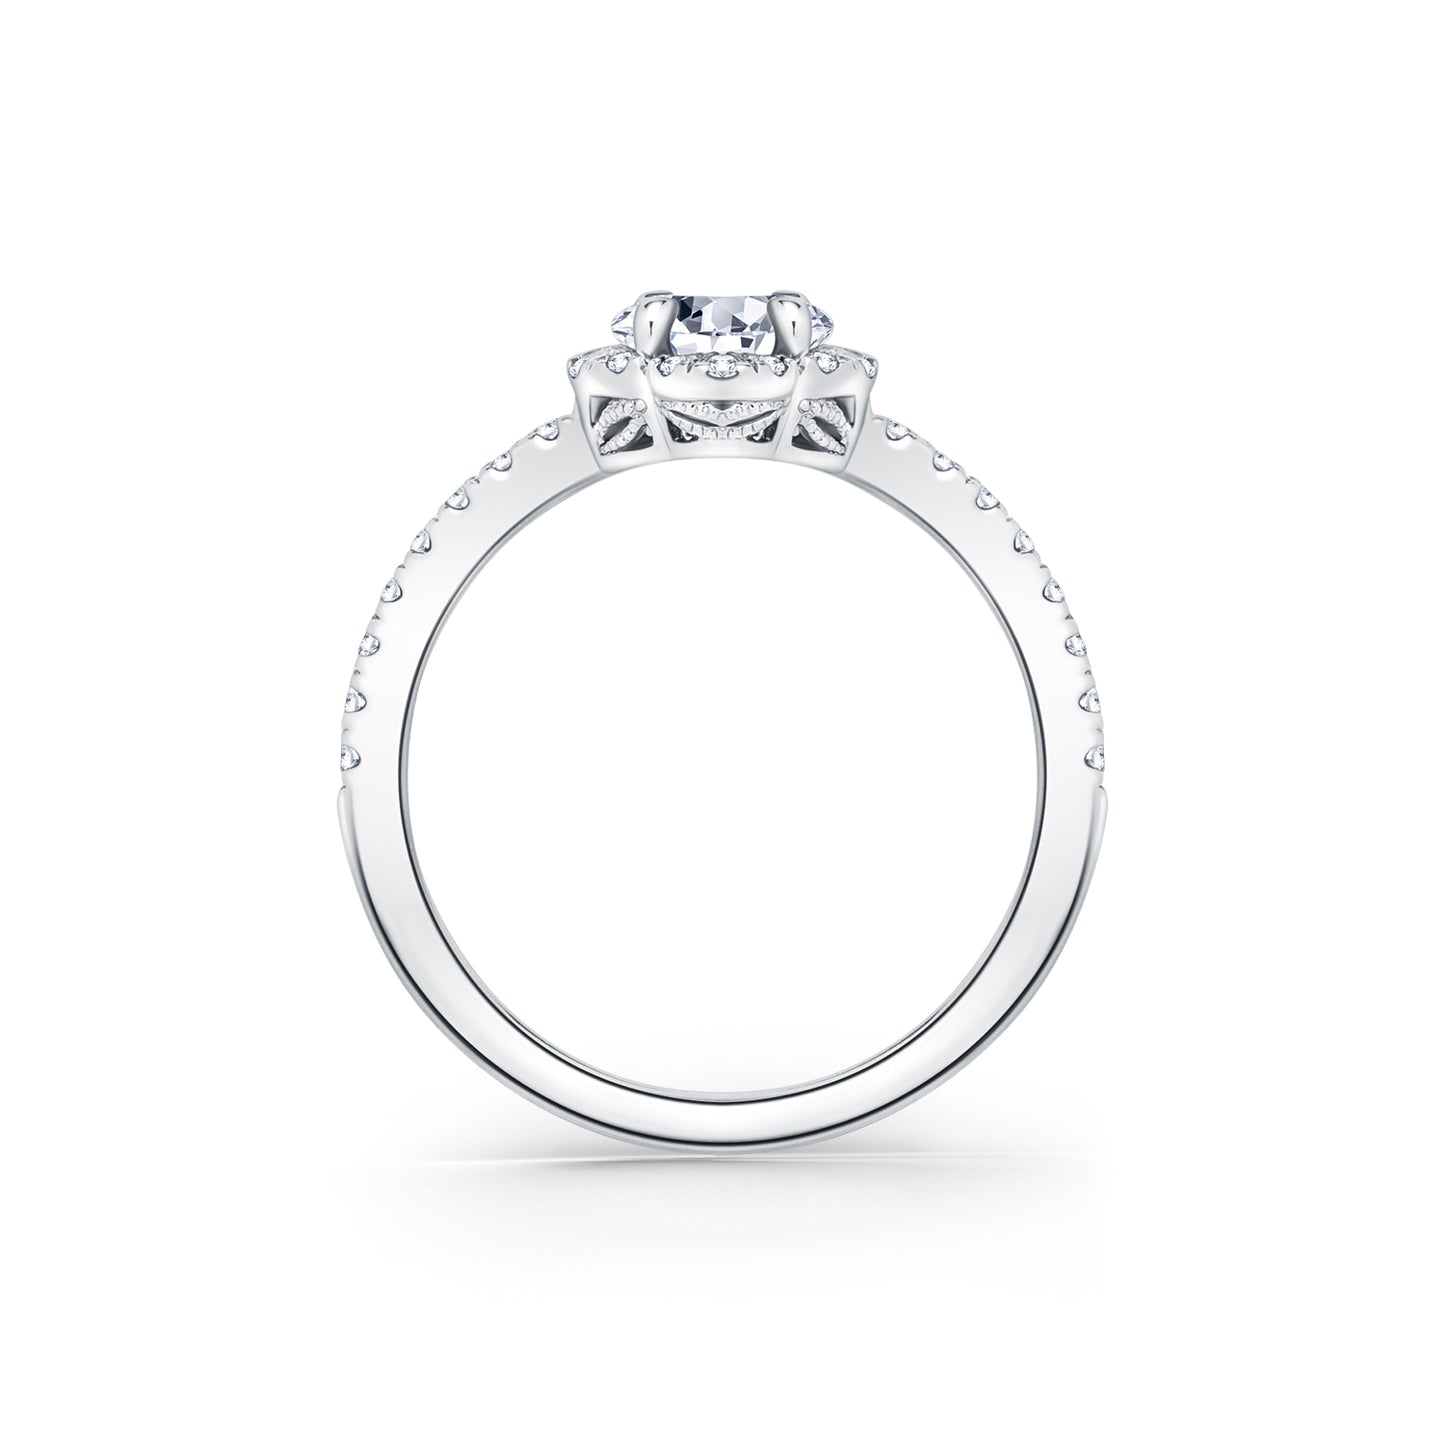 Floral Delicate Halo Diamond Engagement Ring